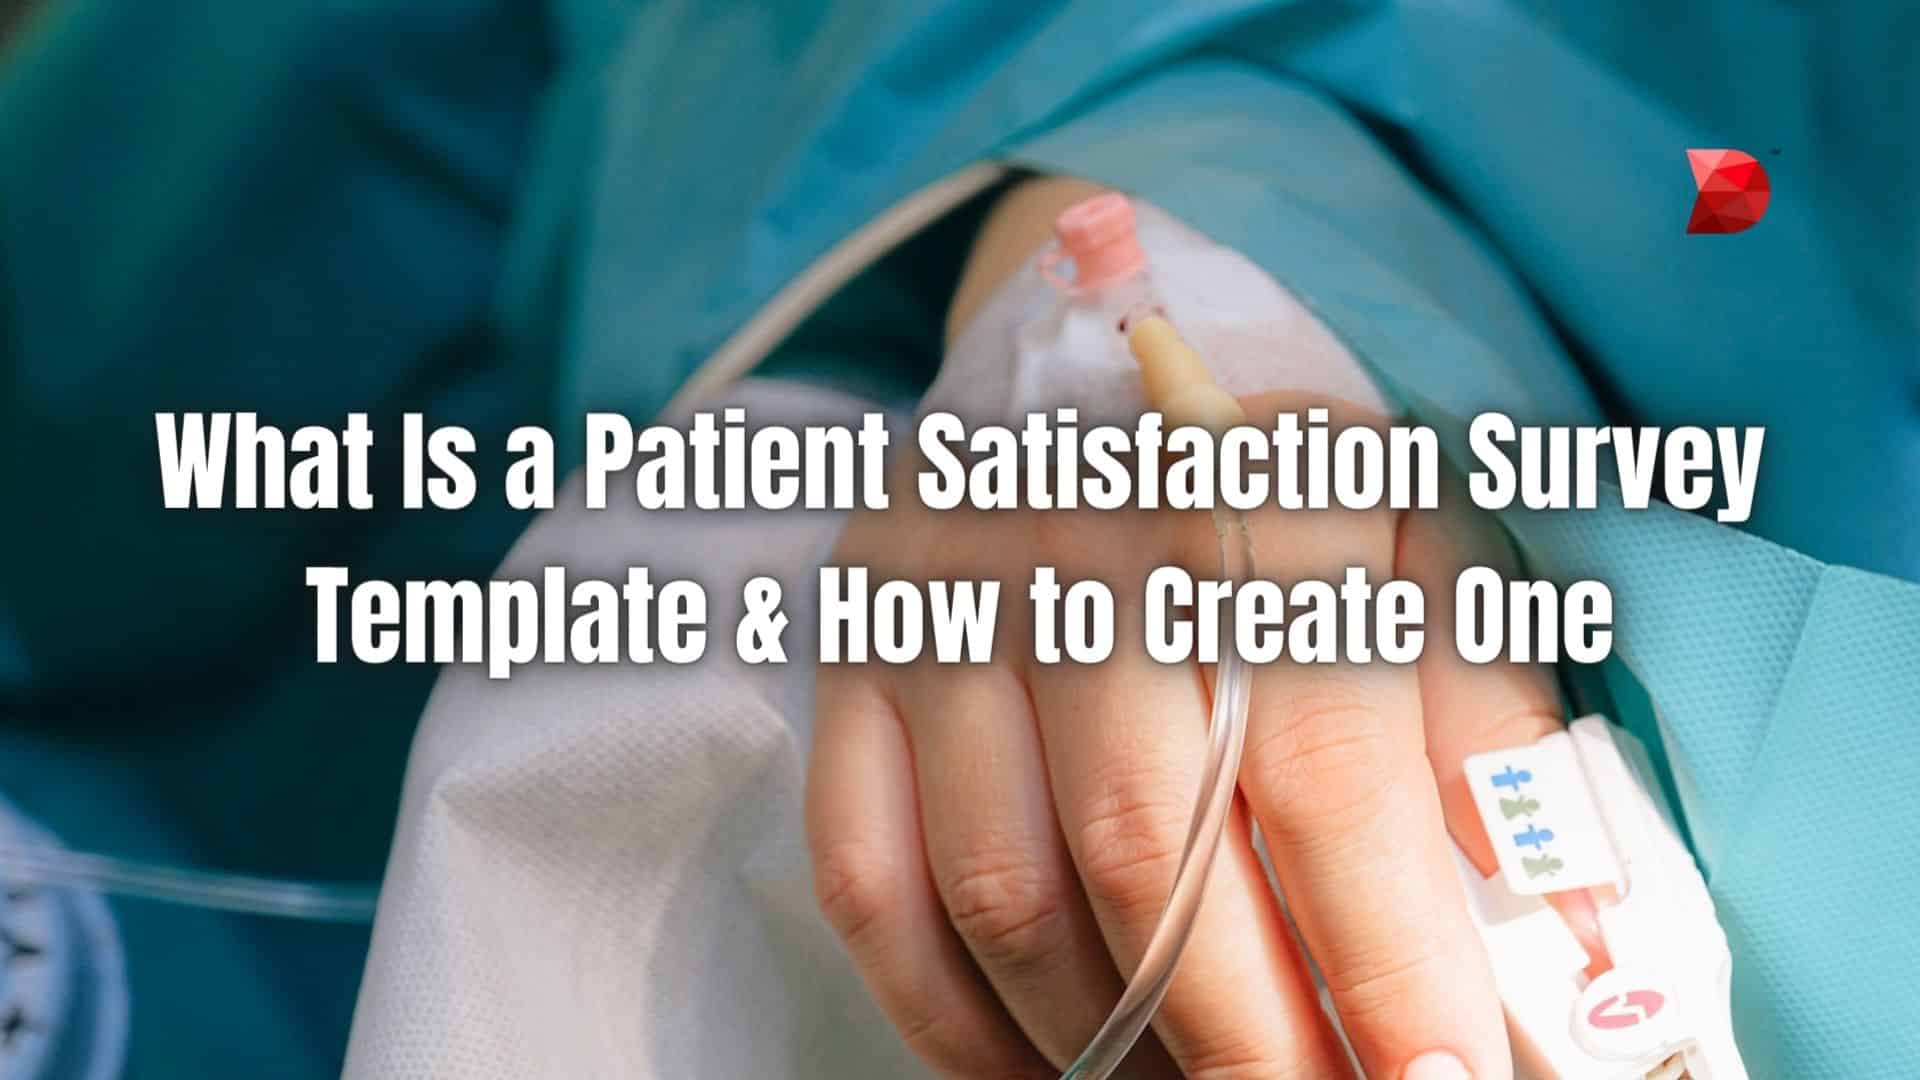 What Is a Patient Satisfaction Survey Template & How to Create One